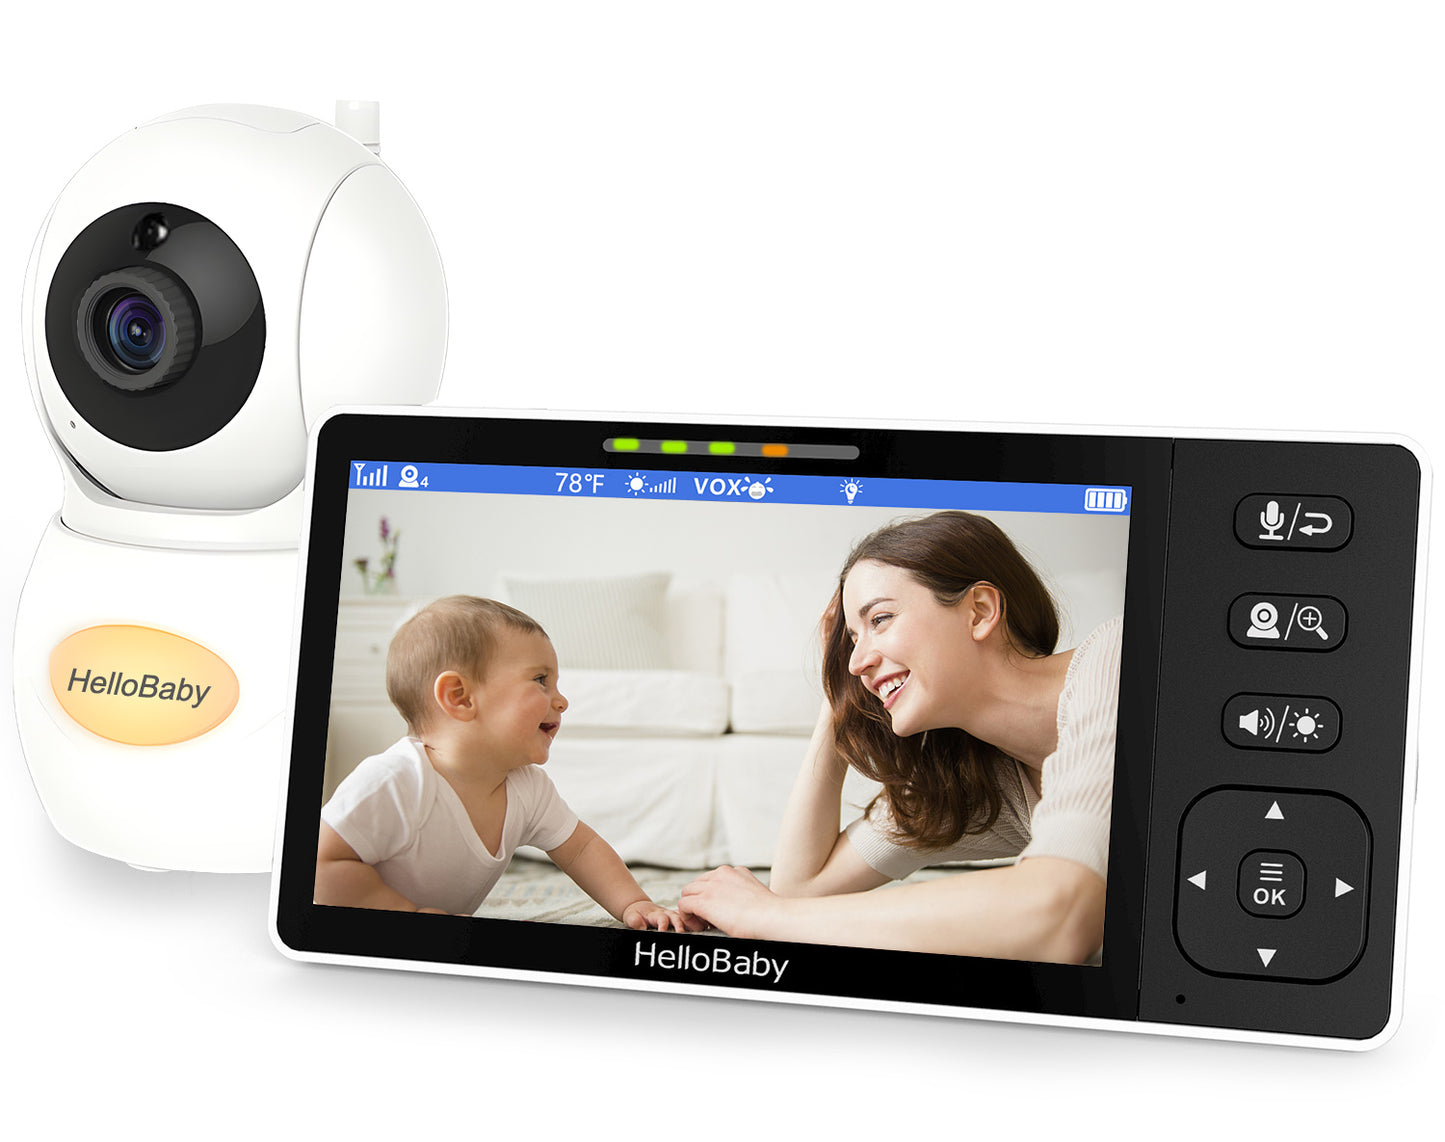 hellobaby best baby monitor - (Newest Model) HelloBaby 720P 5.5'' HD Video Baby Monitor No WiFi, Remote Pan Tilt Zoom Baby Monitor with Camera and Audio Wide View Range, 1080P Camera, Night Light, Hack Proof, 4000mAh Battery, Time&Clock  